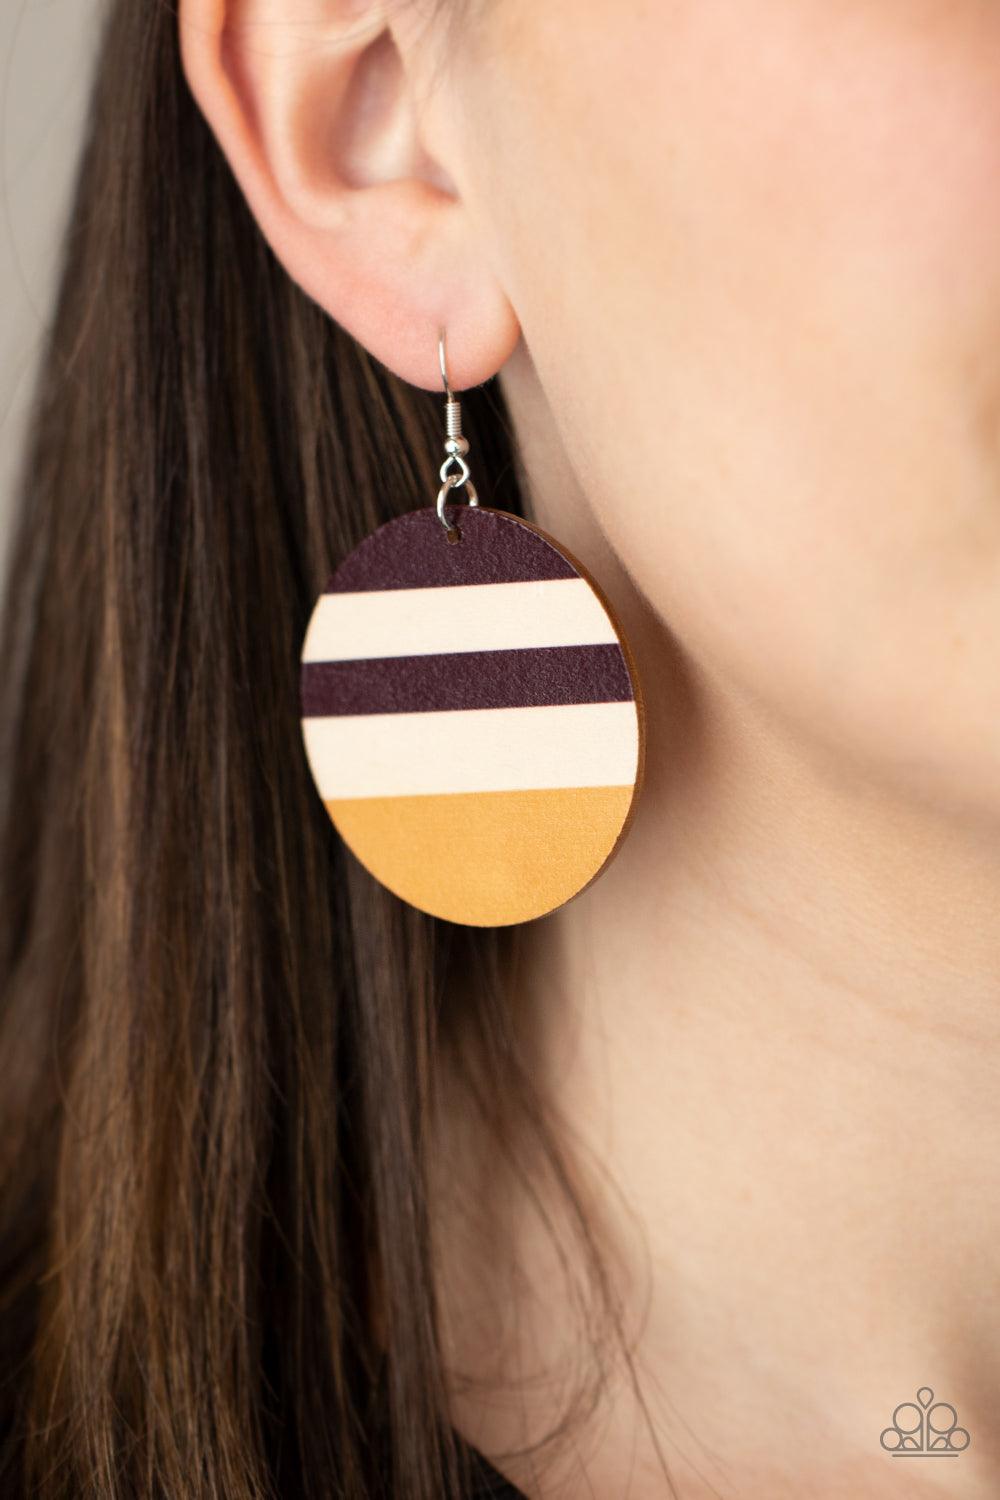 Paparazzi Accessories Yacht Party - Yellow The front of a shiny wooden disc is stripped in purplish-brown and yellow accents, creating a colorful summery look. Earring attaches to a standard fishhook fitting. Sold as one pair of earrings. Jewelry